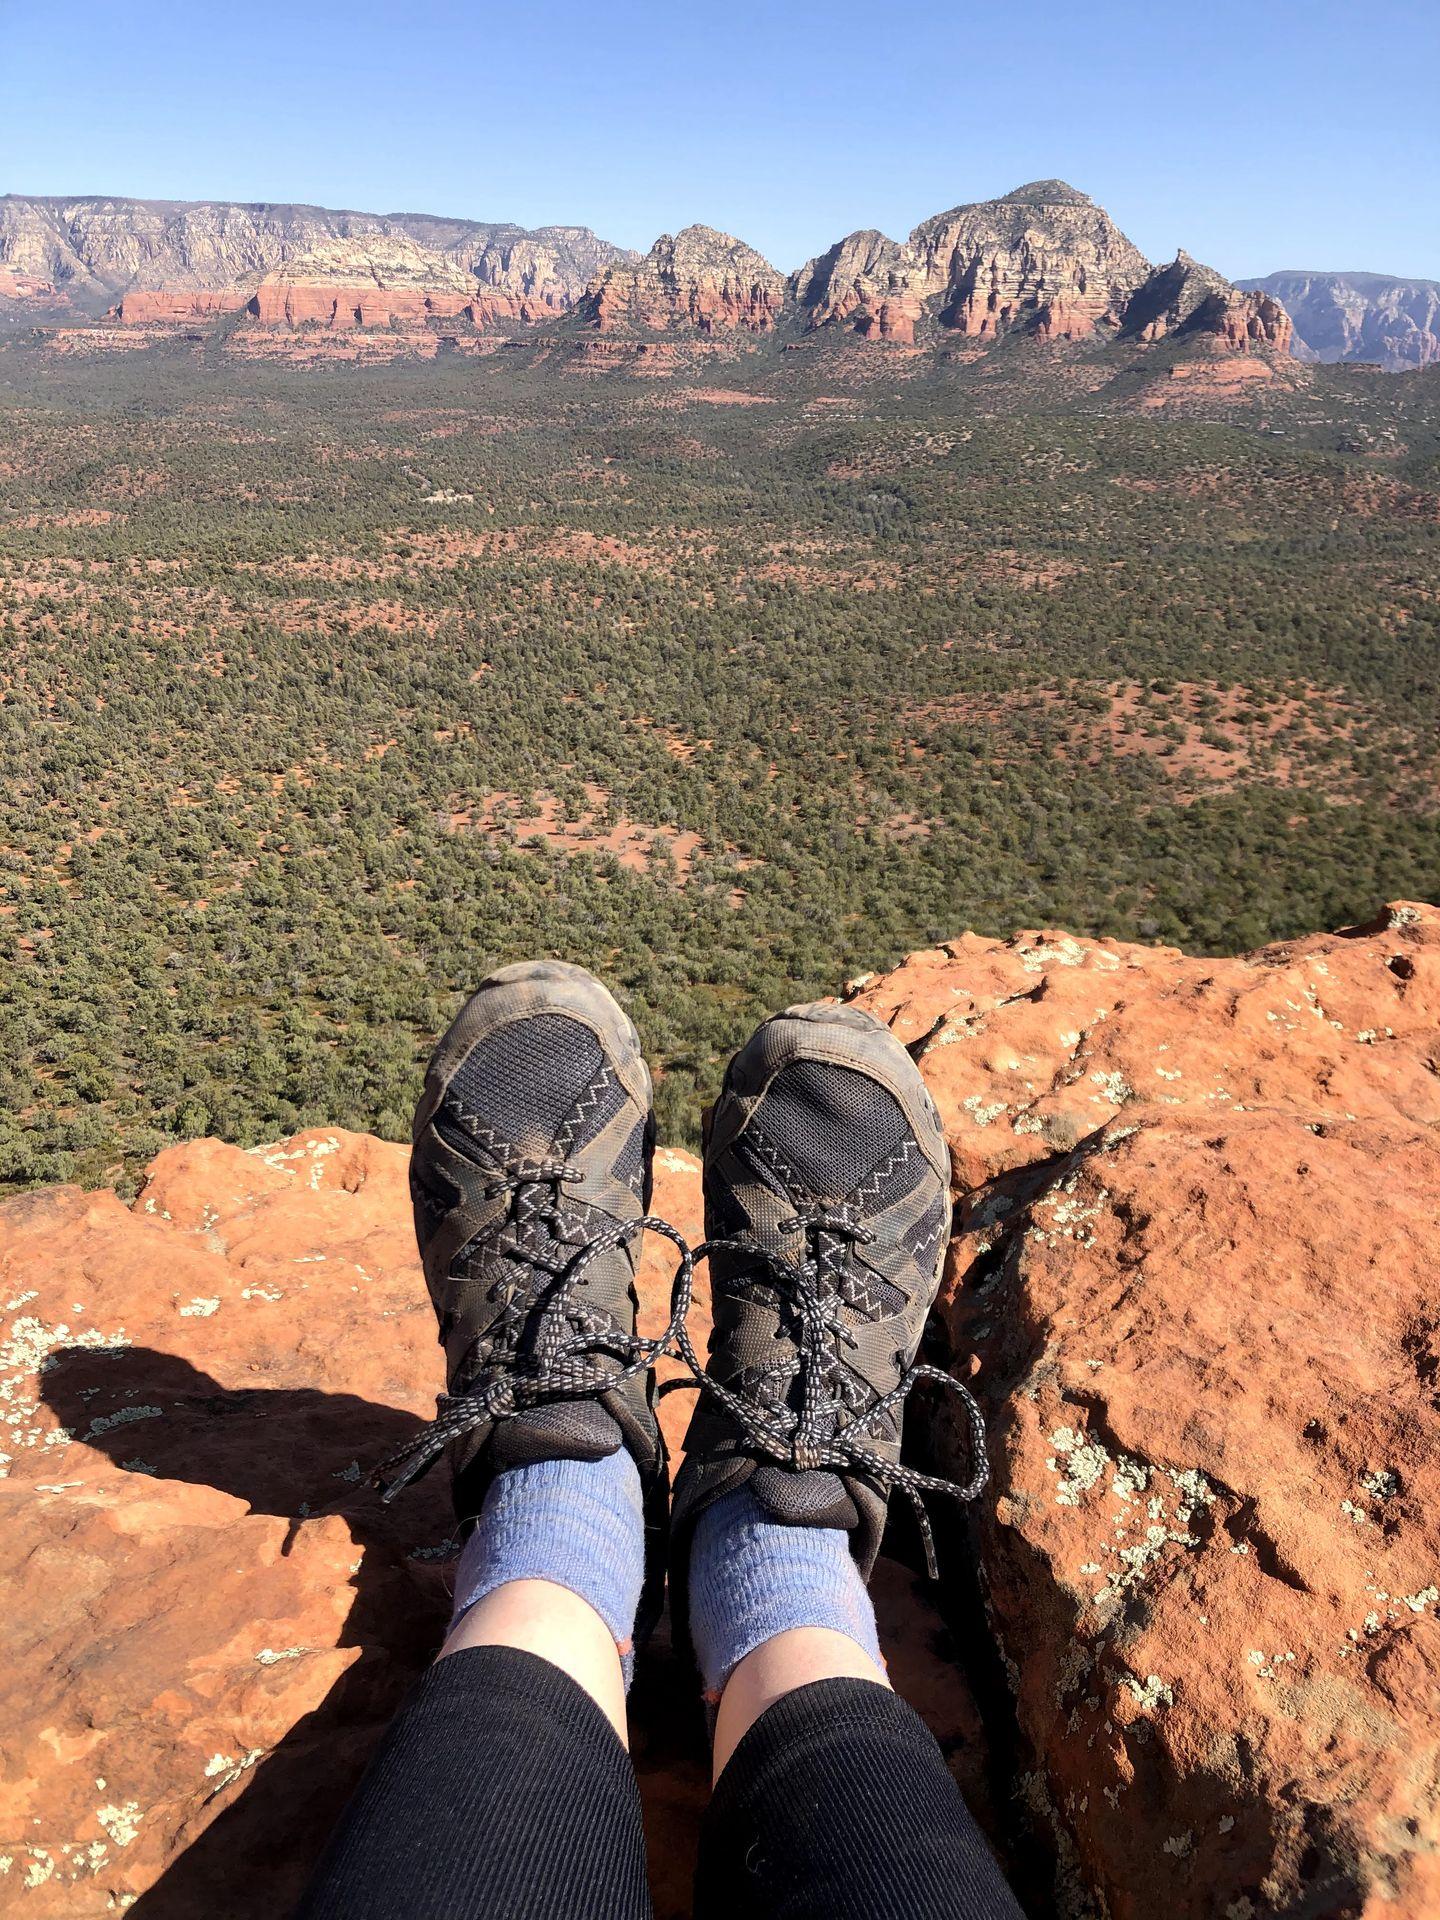 A photo of Lydia's feet wearing Merrell hiking shoes in Sedona. There are red rock mountains far out in the distance.